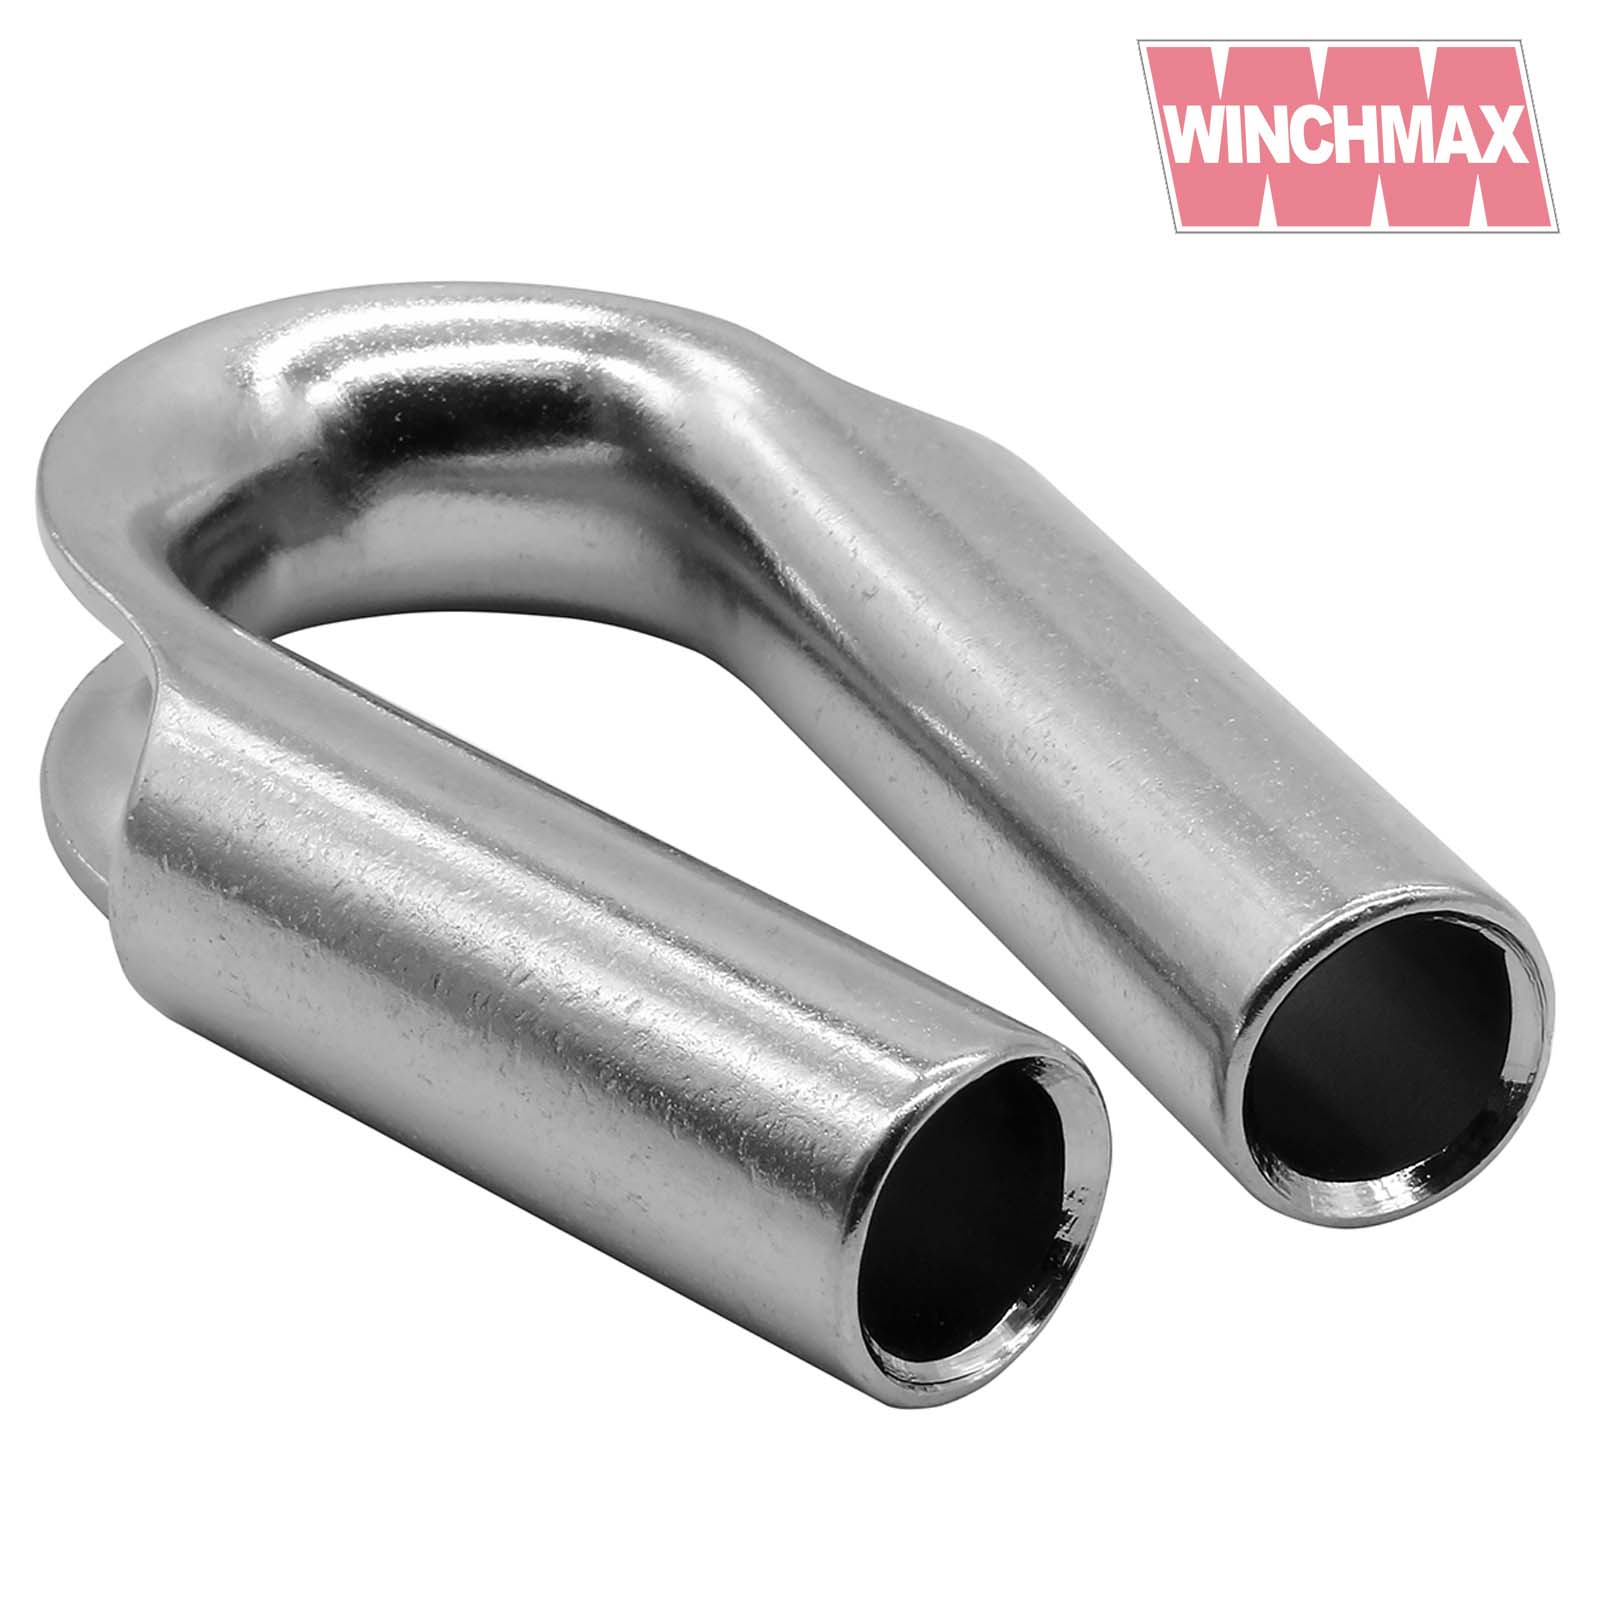 Winchmax Rope Thimble